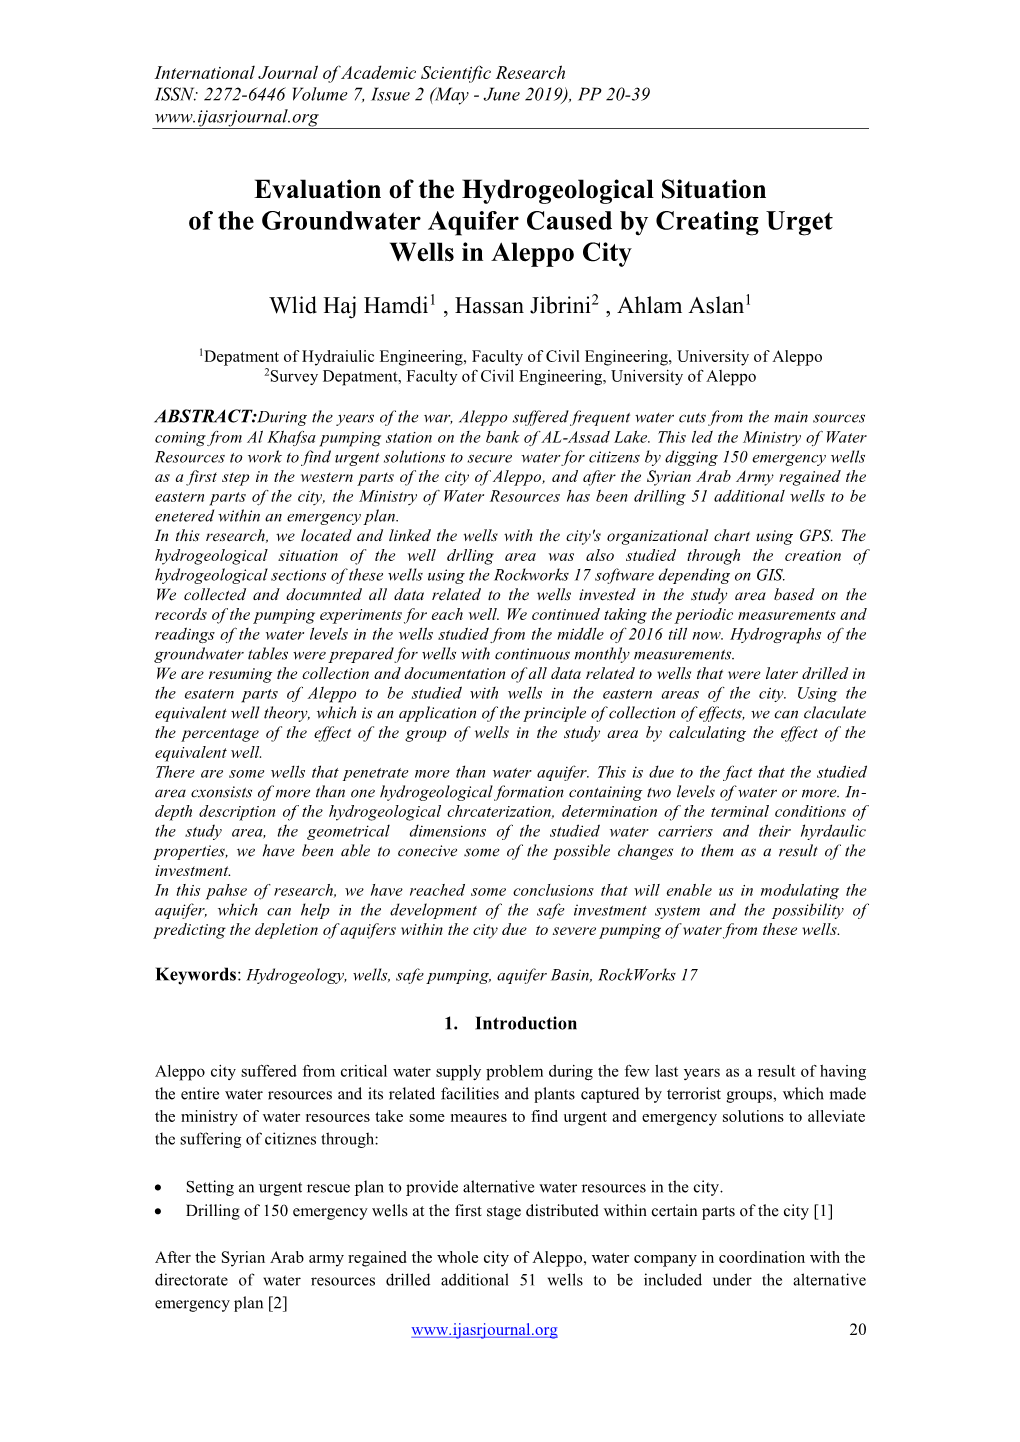 Evaluation of the Hydrogeological Situation of the Groundwater Aquifer Caused by Creating Urget Wells in Aleppo City